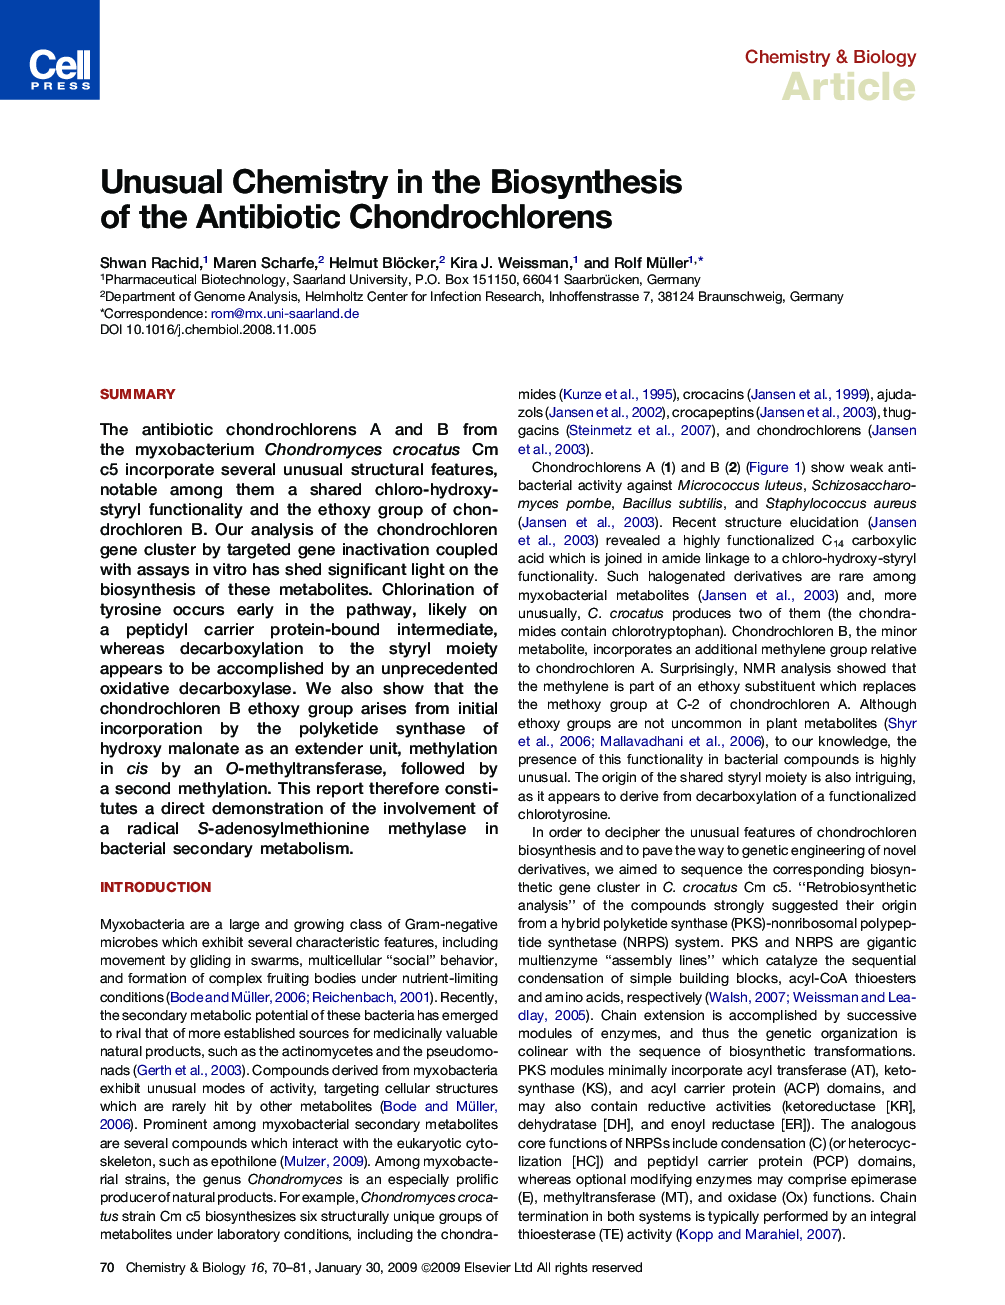 Unusual Chemistry in the Biosynthesis of the Antibiotic Chondrochlorens